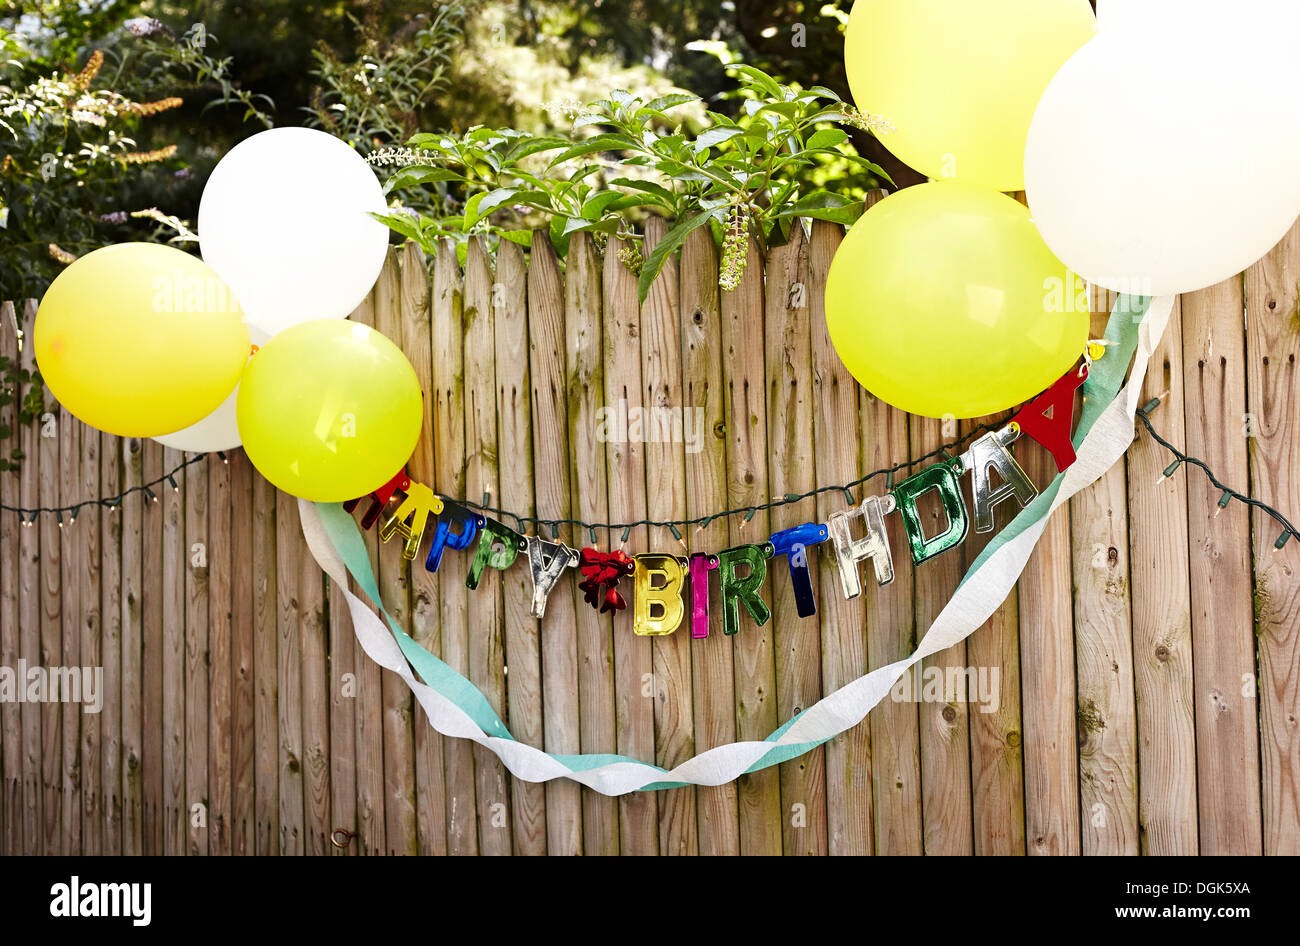 Happy Birthday banner and balloons tied to fence Stock Photo